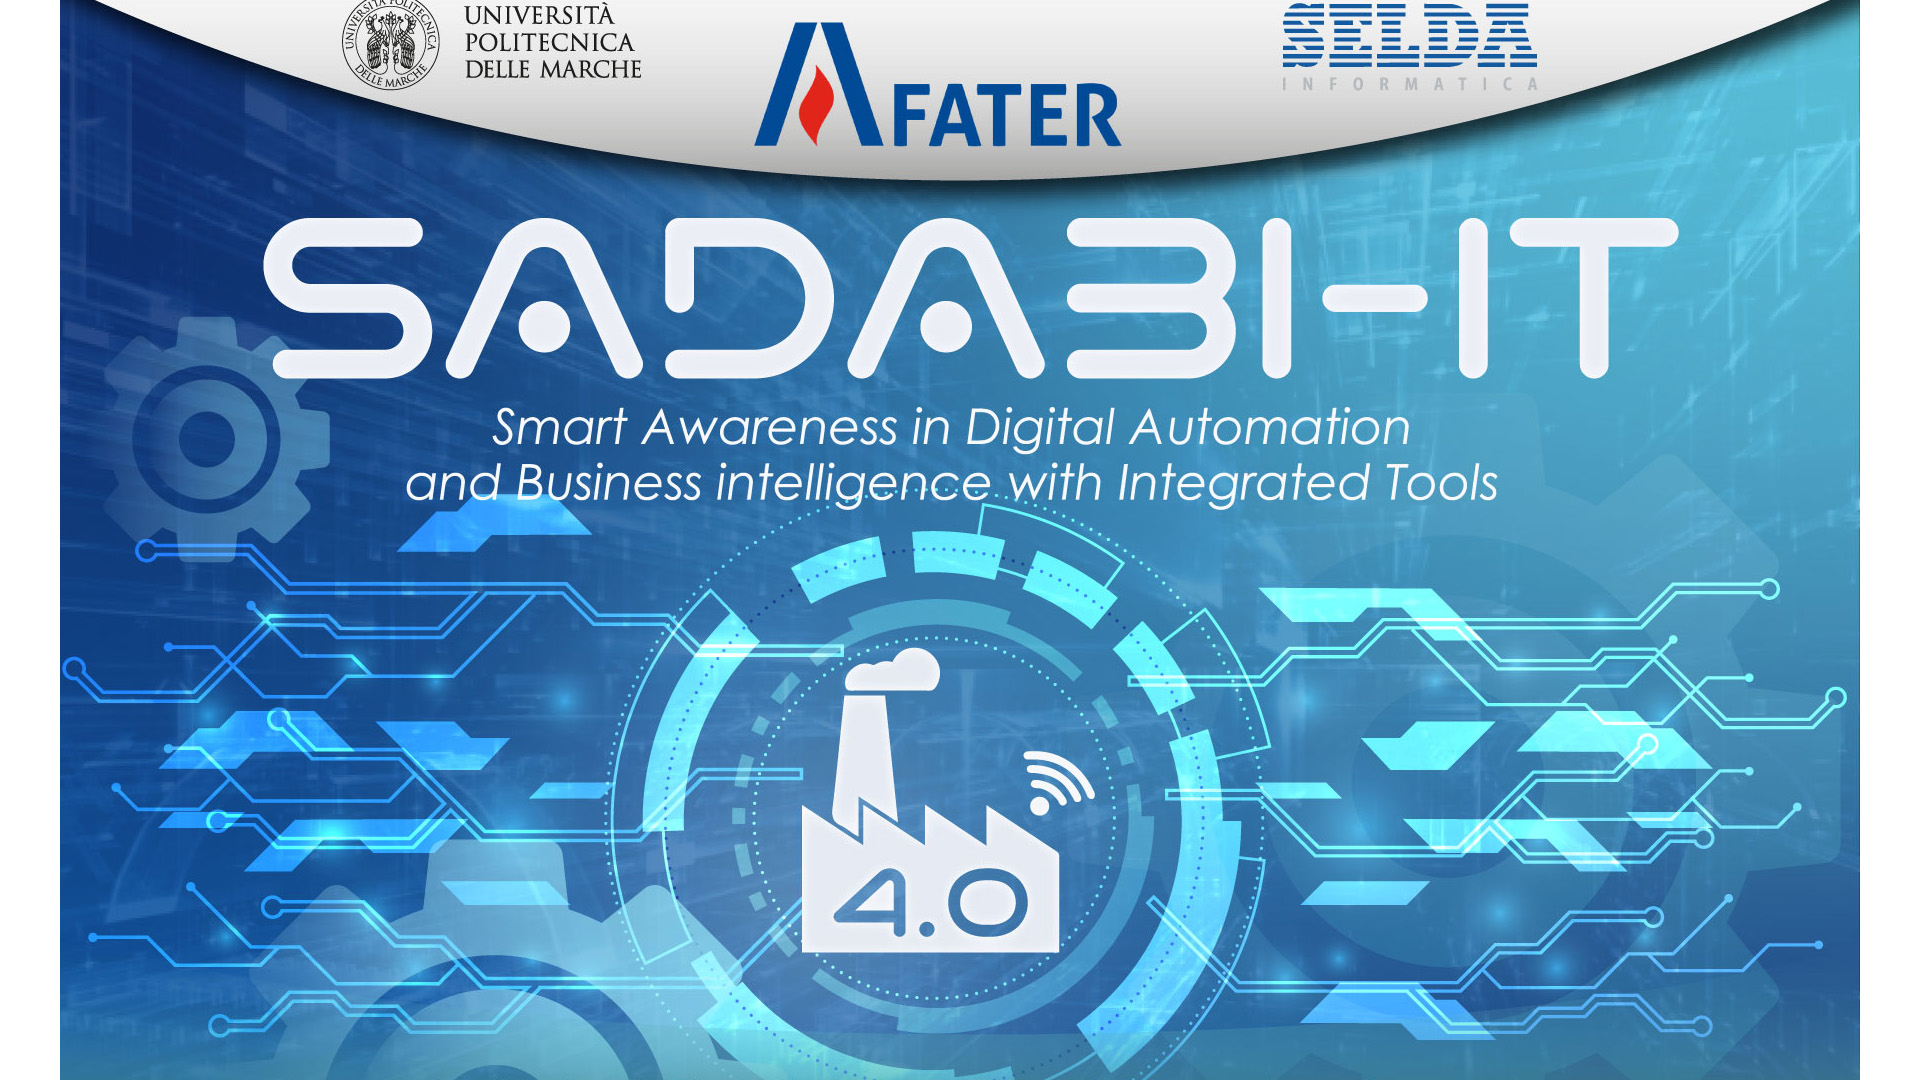 Sadabi-it: smart awareness in digital automation and business intelligence with integrated tools